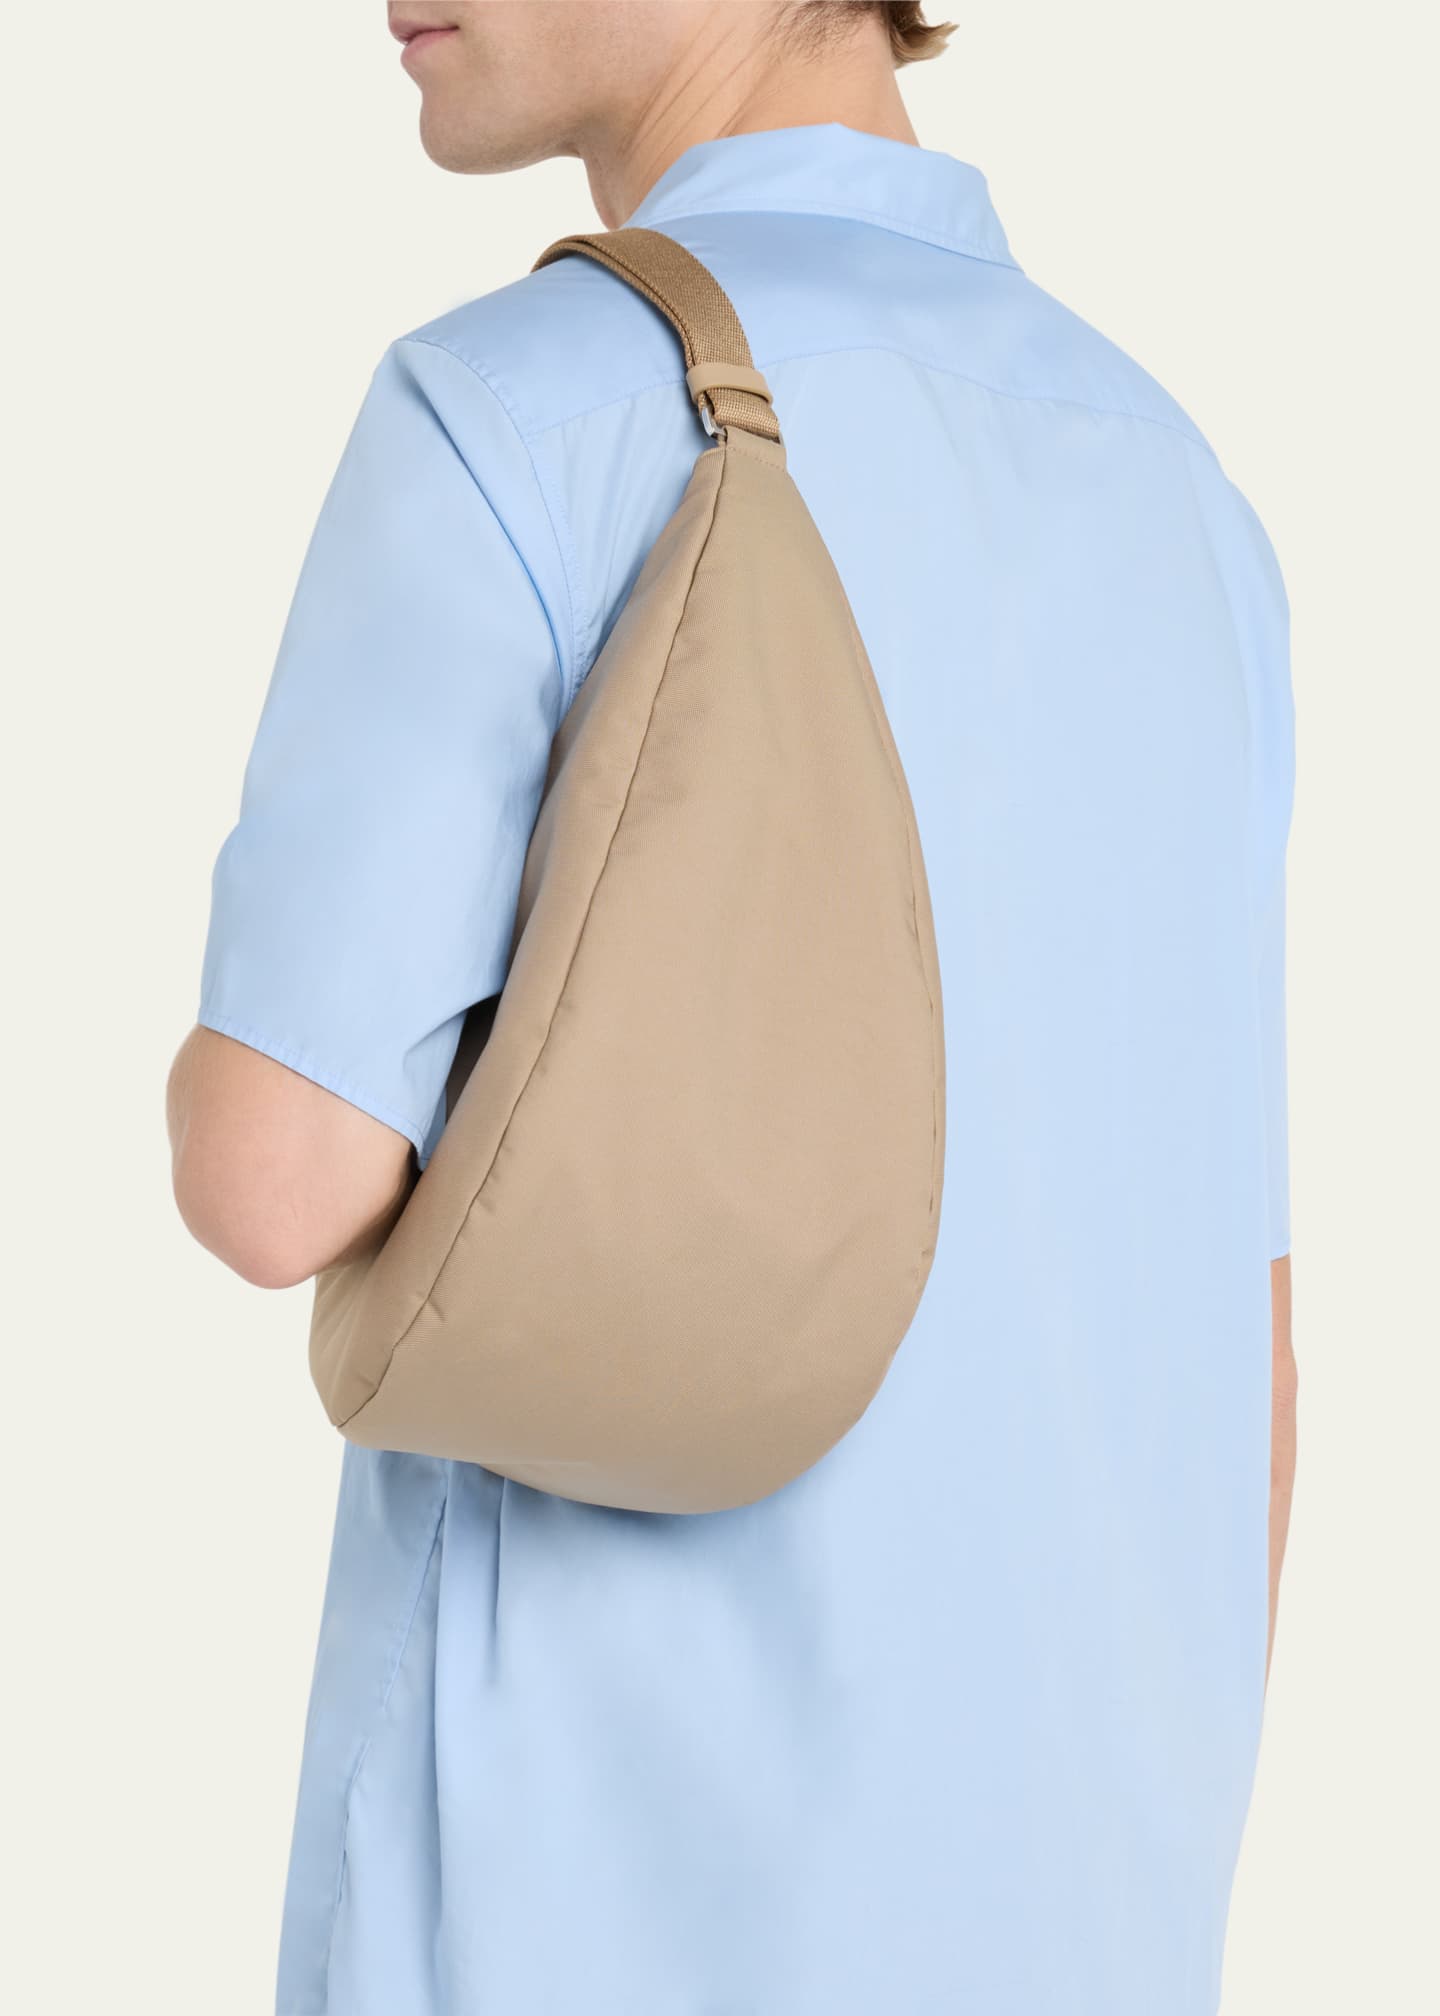 Slouchy Banana Shoulder Bag in Blue - The Row